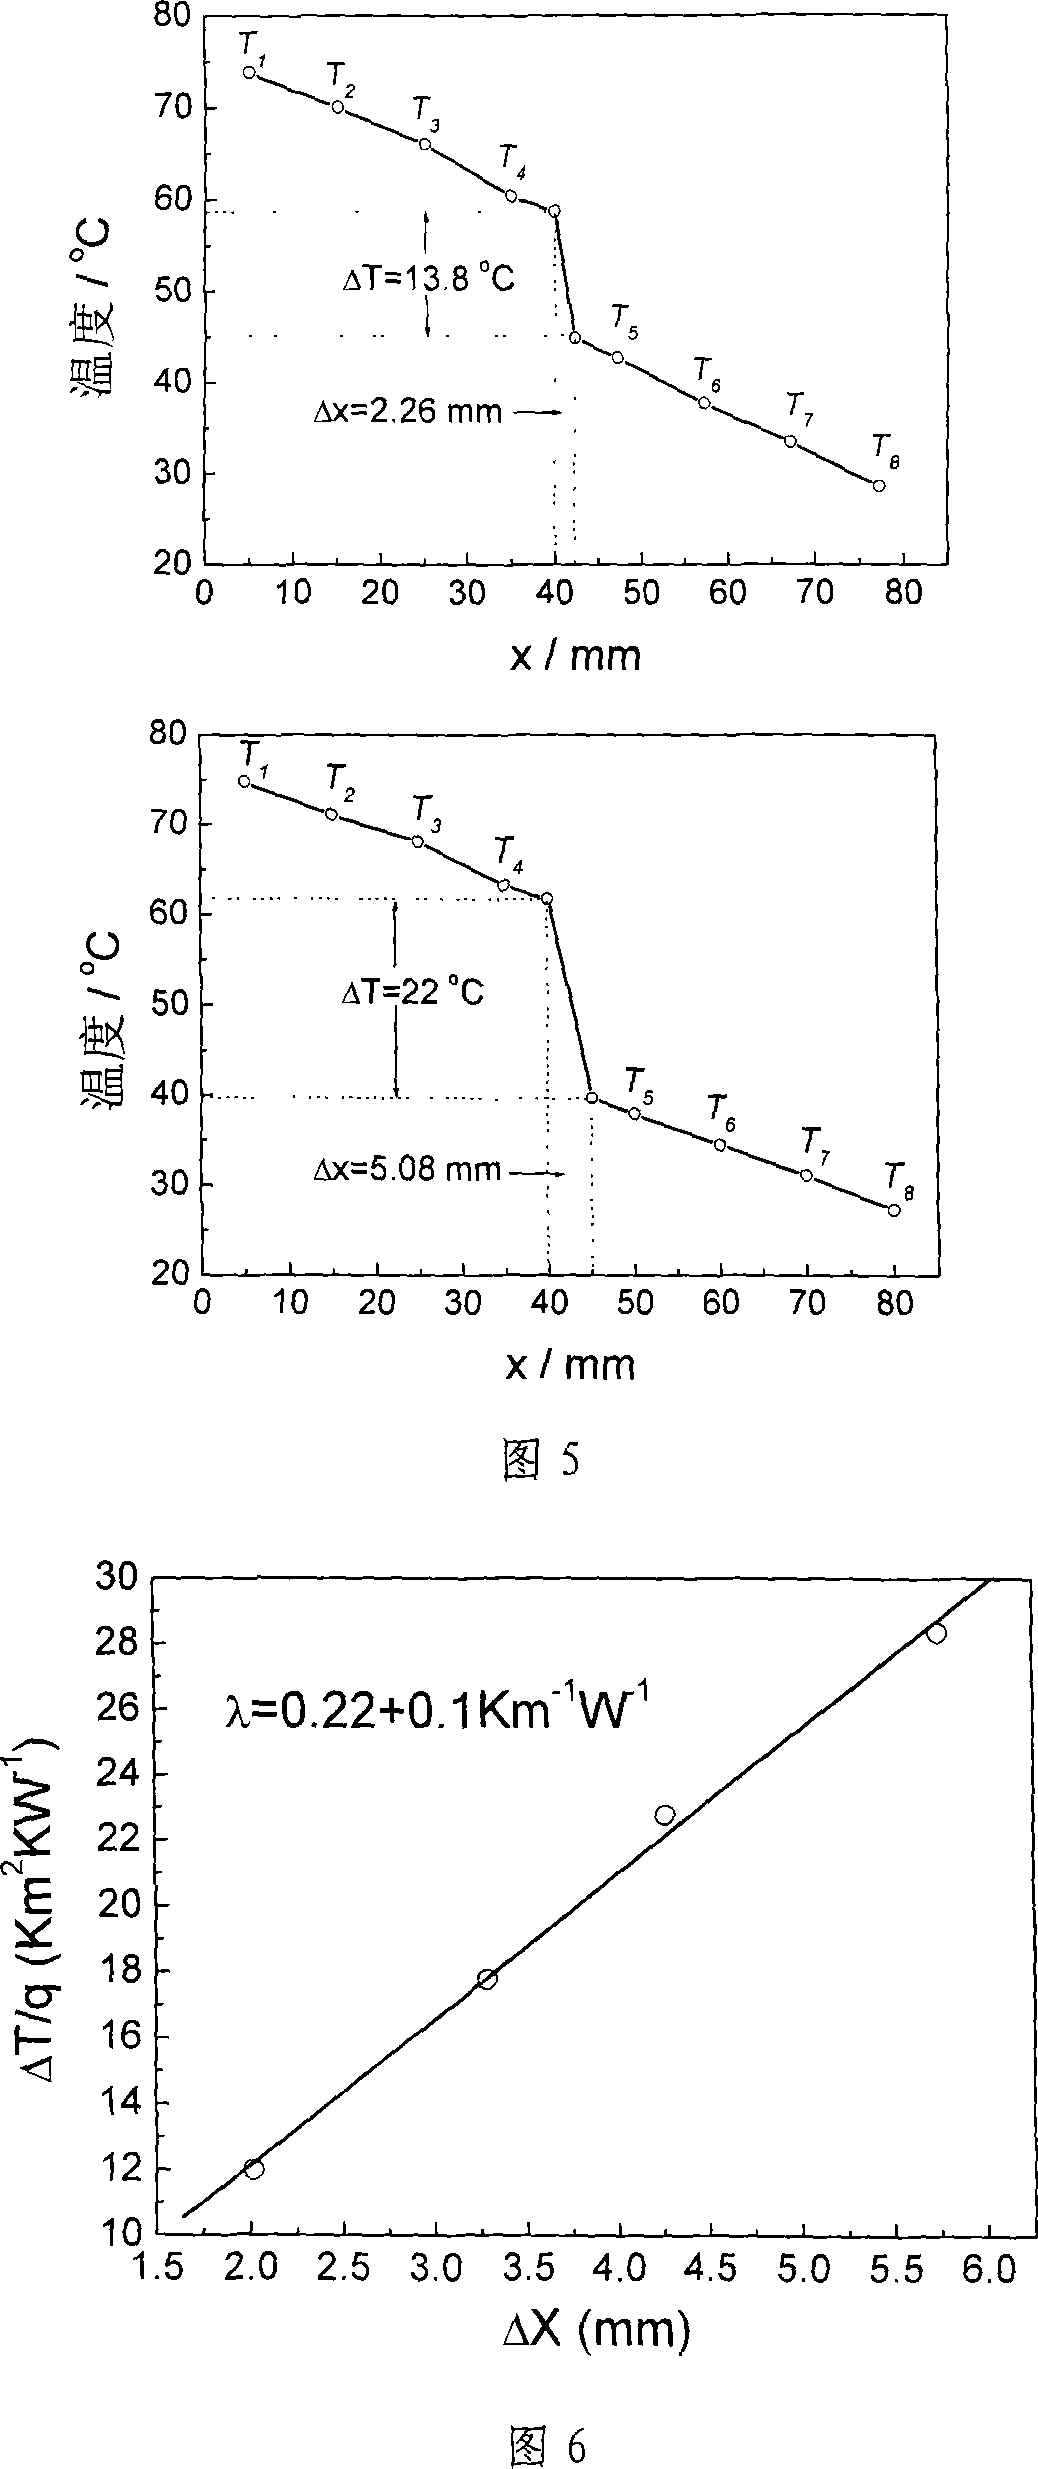 Double heat flux gauge steady state method for measuring material heat conductivity